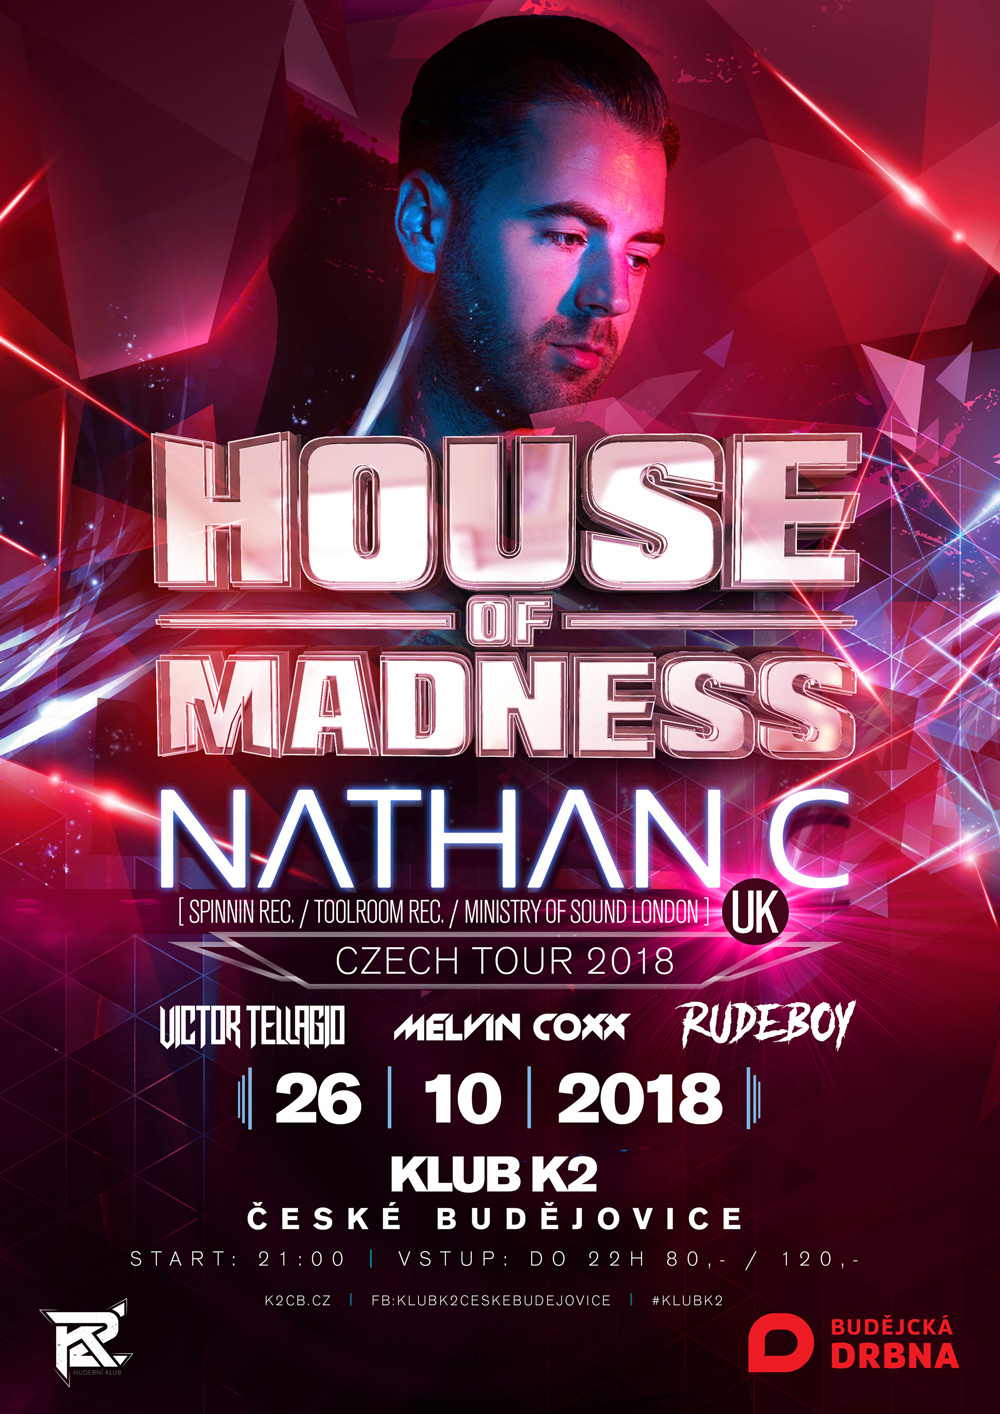 House of madness - Nathan C /UK/